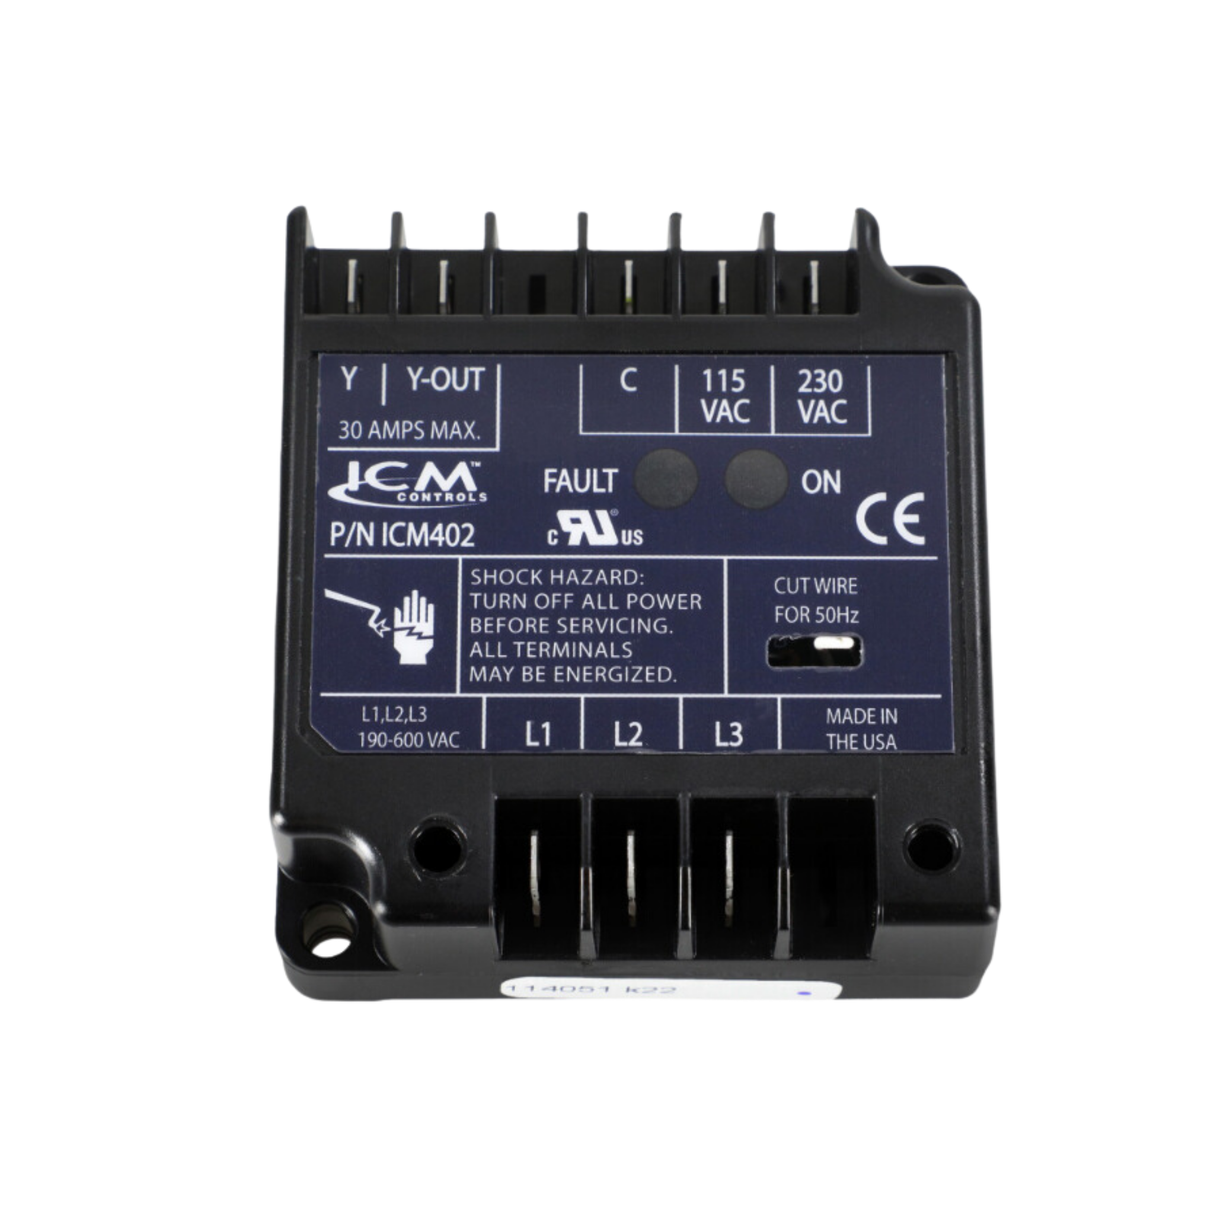 ICM Controls ICM402 190-600VAC, SPST Normally Open Relay, Three Phase Line Voltage Monitor with Automatic Reset from a Fault Condition